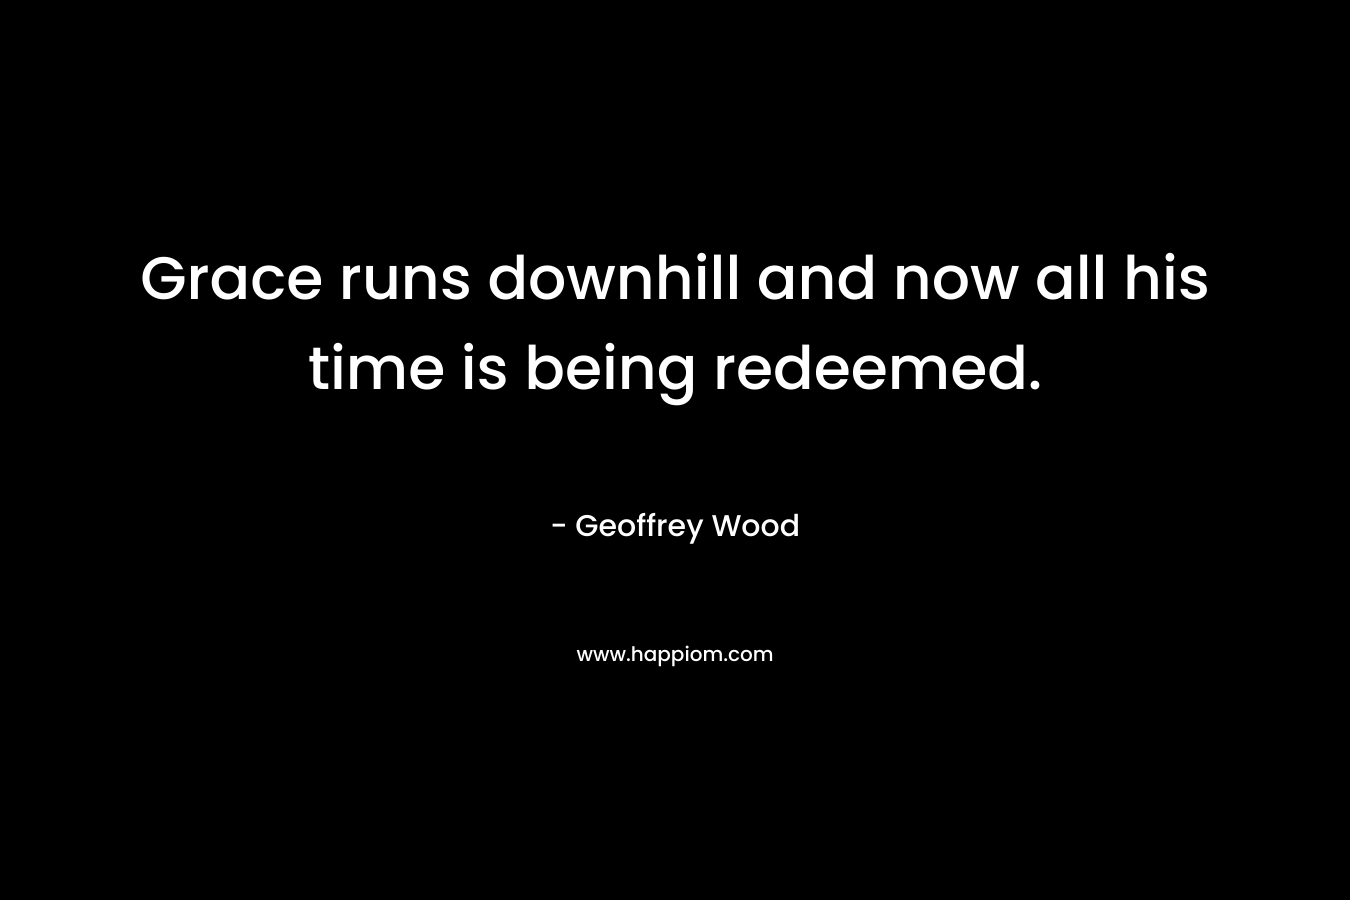 Grace runs downhill and now all his time is being redeemed. – Geoffrey Wood